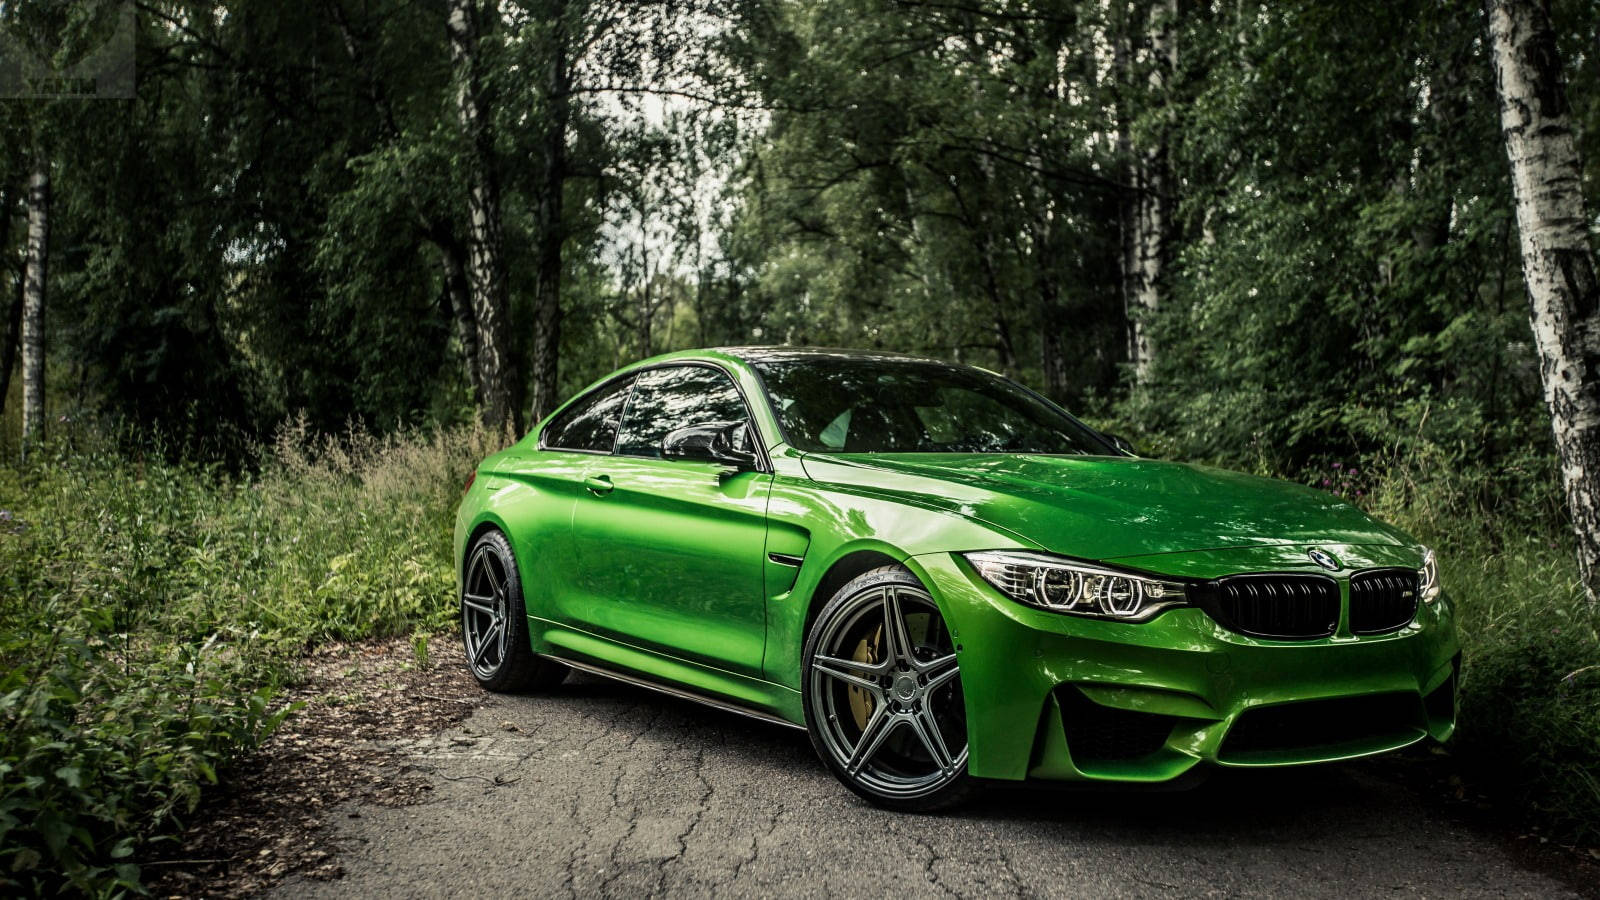 Caption: Majestic Green Bmw M4 Roaring Through The Forest